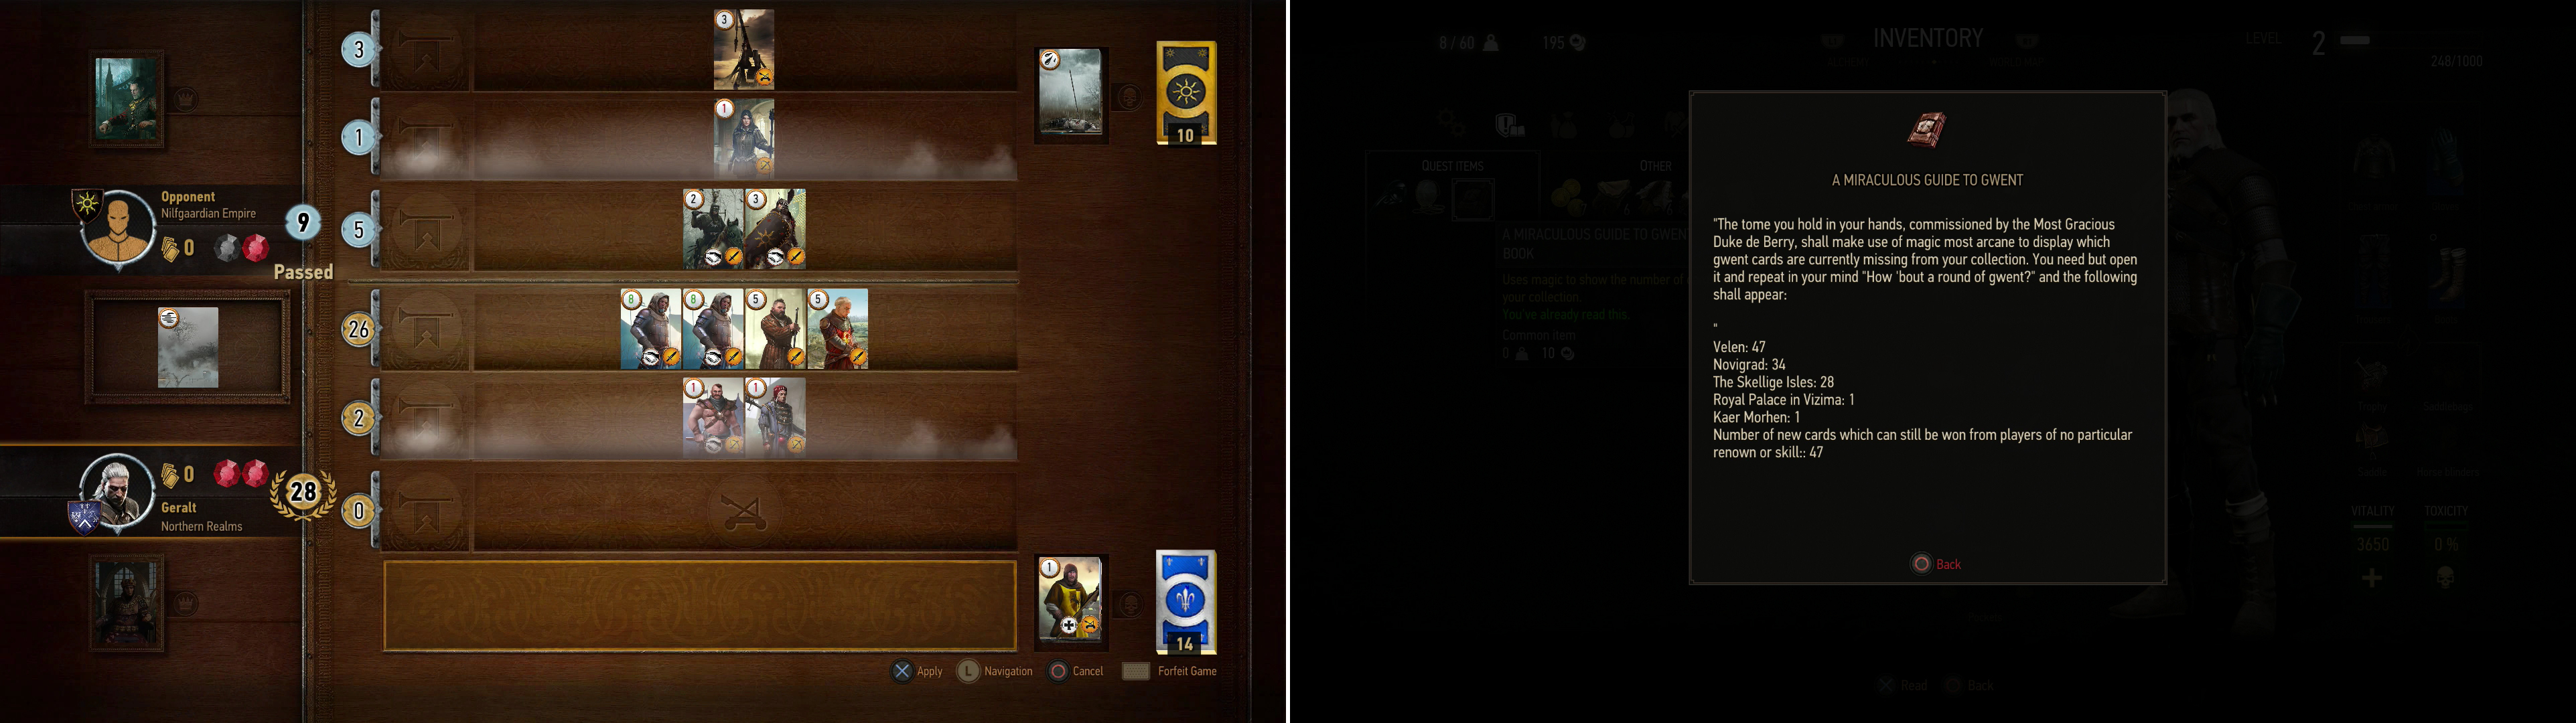 Thrash the Scholar at Gwent ot win the Zoltan Chivay card… or subsequently, just for fun (left). If you’ve got a patched version of the game, you can check the progress on your Gwent collection with the book “A Miraculous Guide to Gwent” (right).